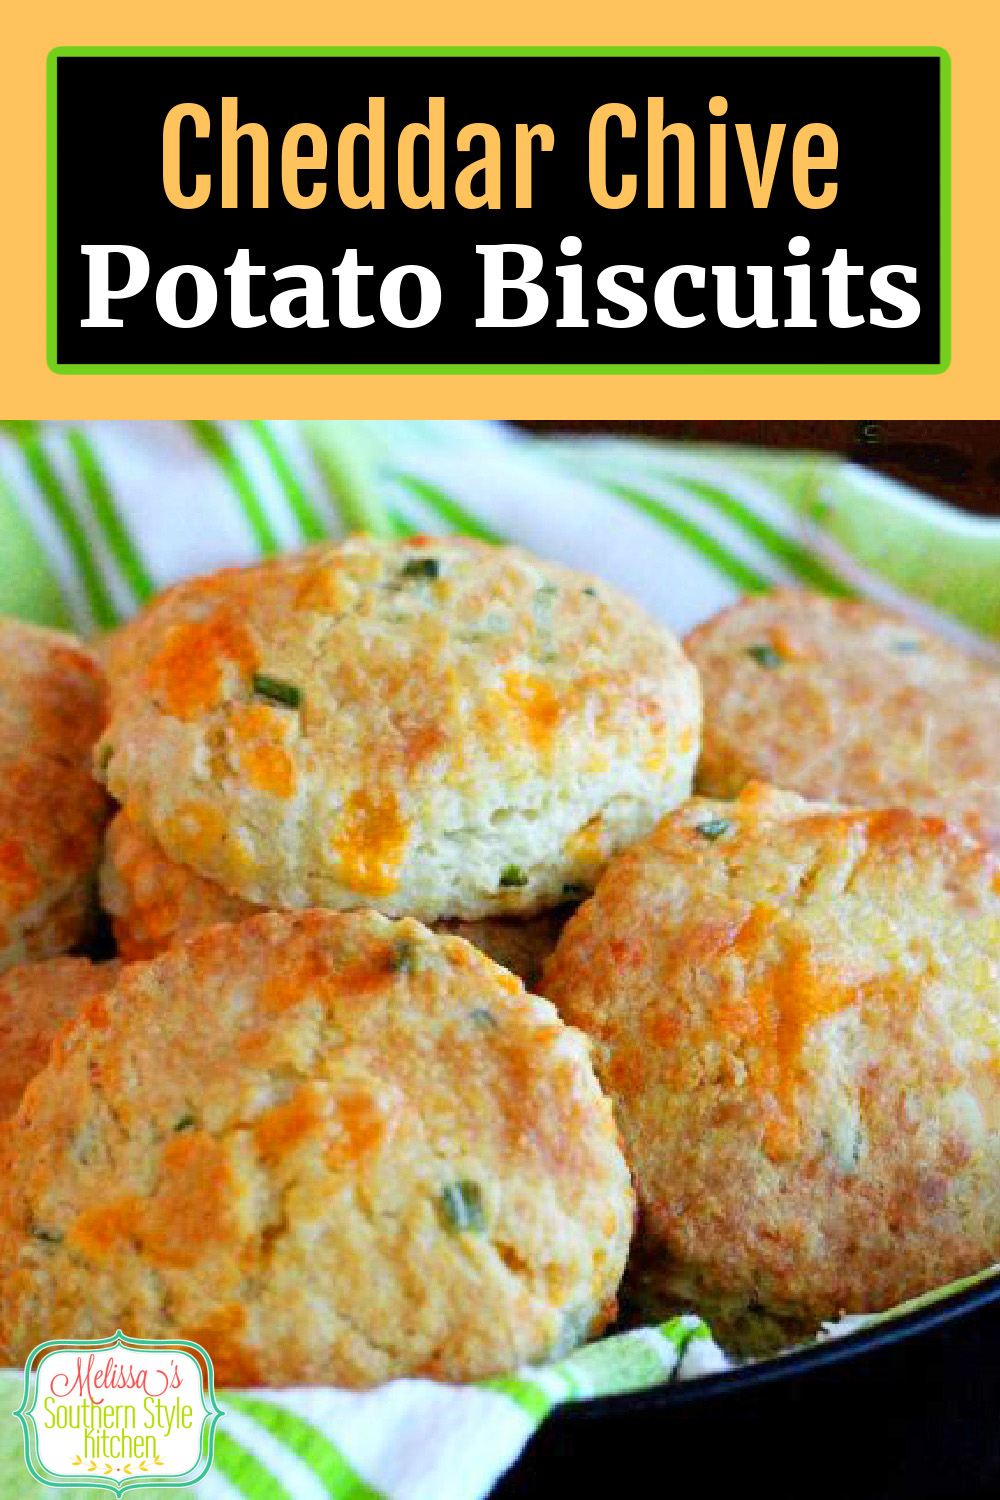 Enjoy these Cheddar Chive Potato Biscuits with butter straight fresh and hot straight from the oven. #cheddarbiscuits #biscuits #potatobread #potatobiscuits #biscuitrecipes #southernbiscuits #biscuitrecipes #southernfood #southernrecipes #potatoes via @melissasssk